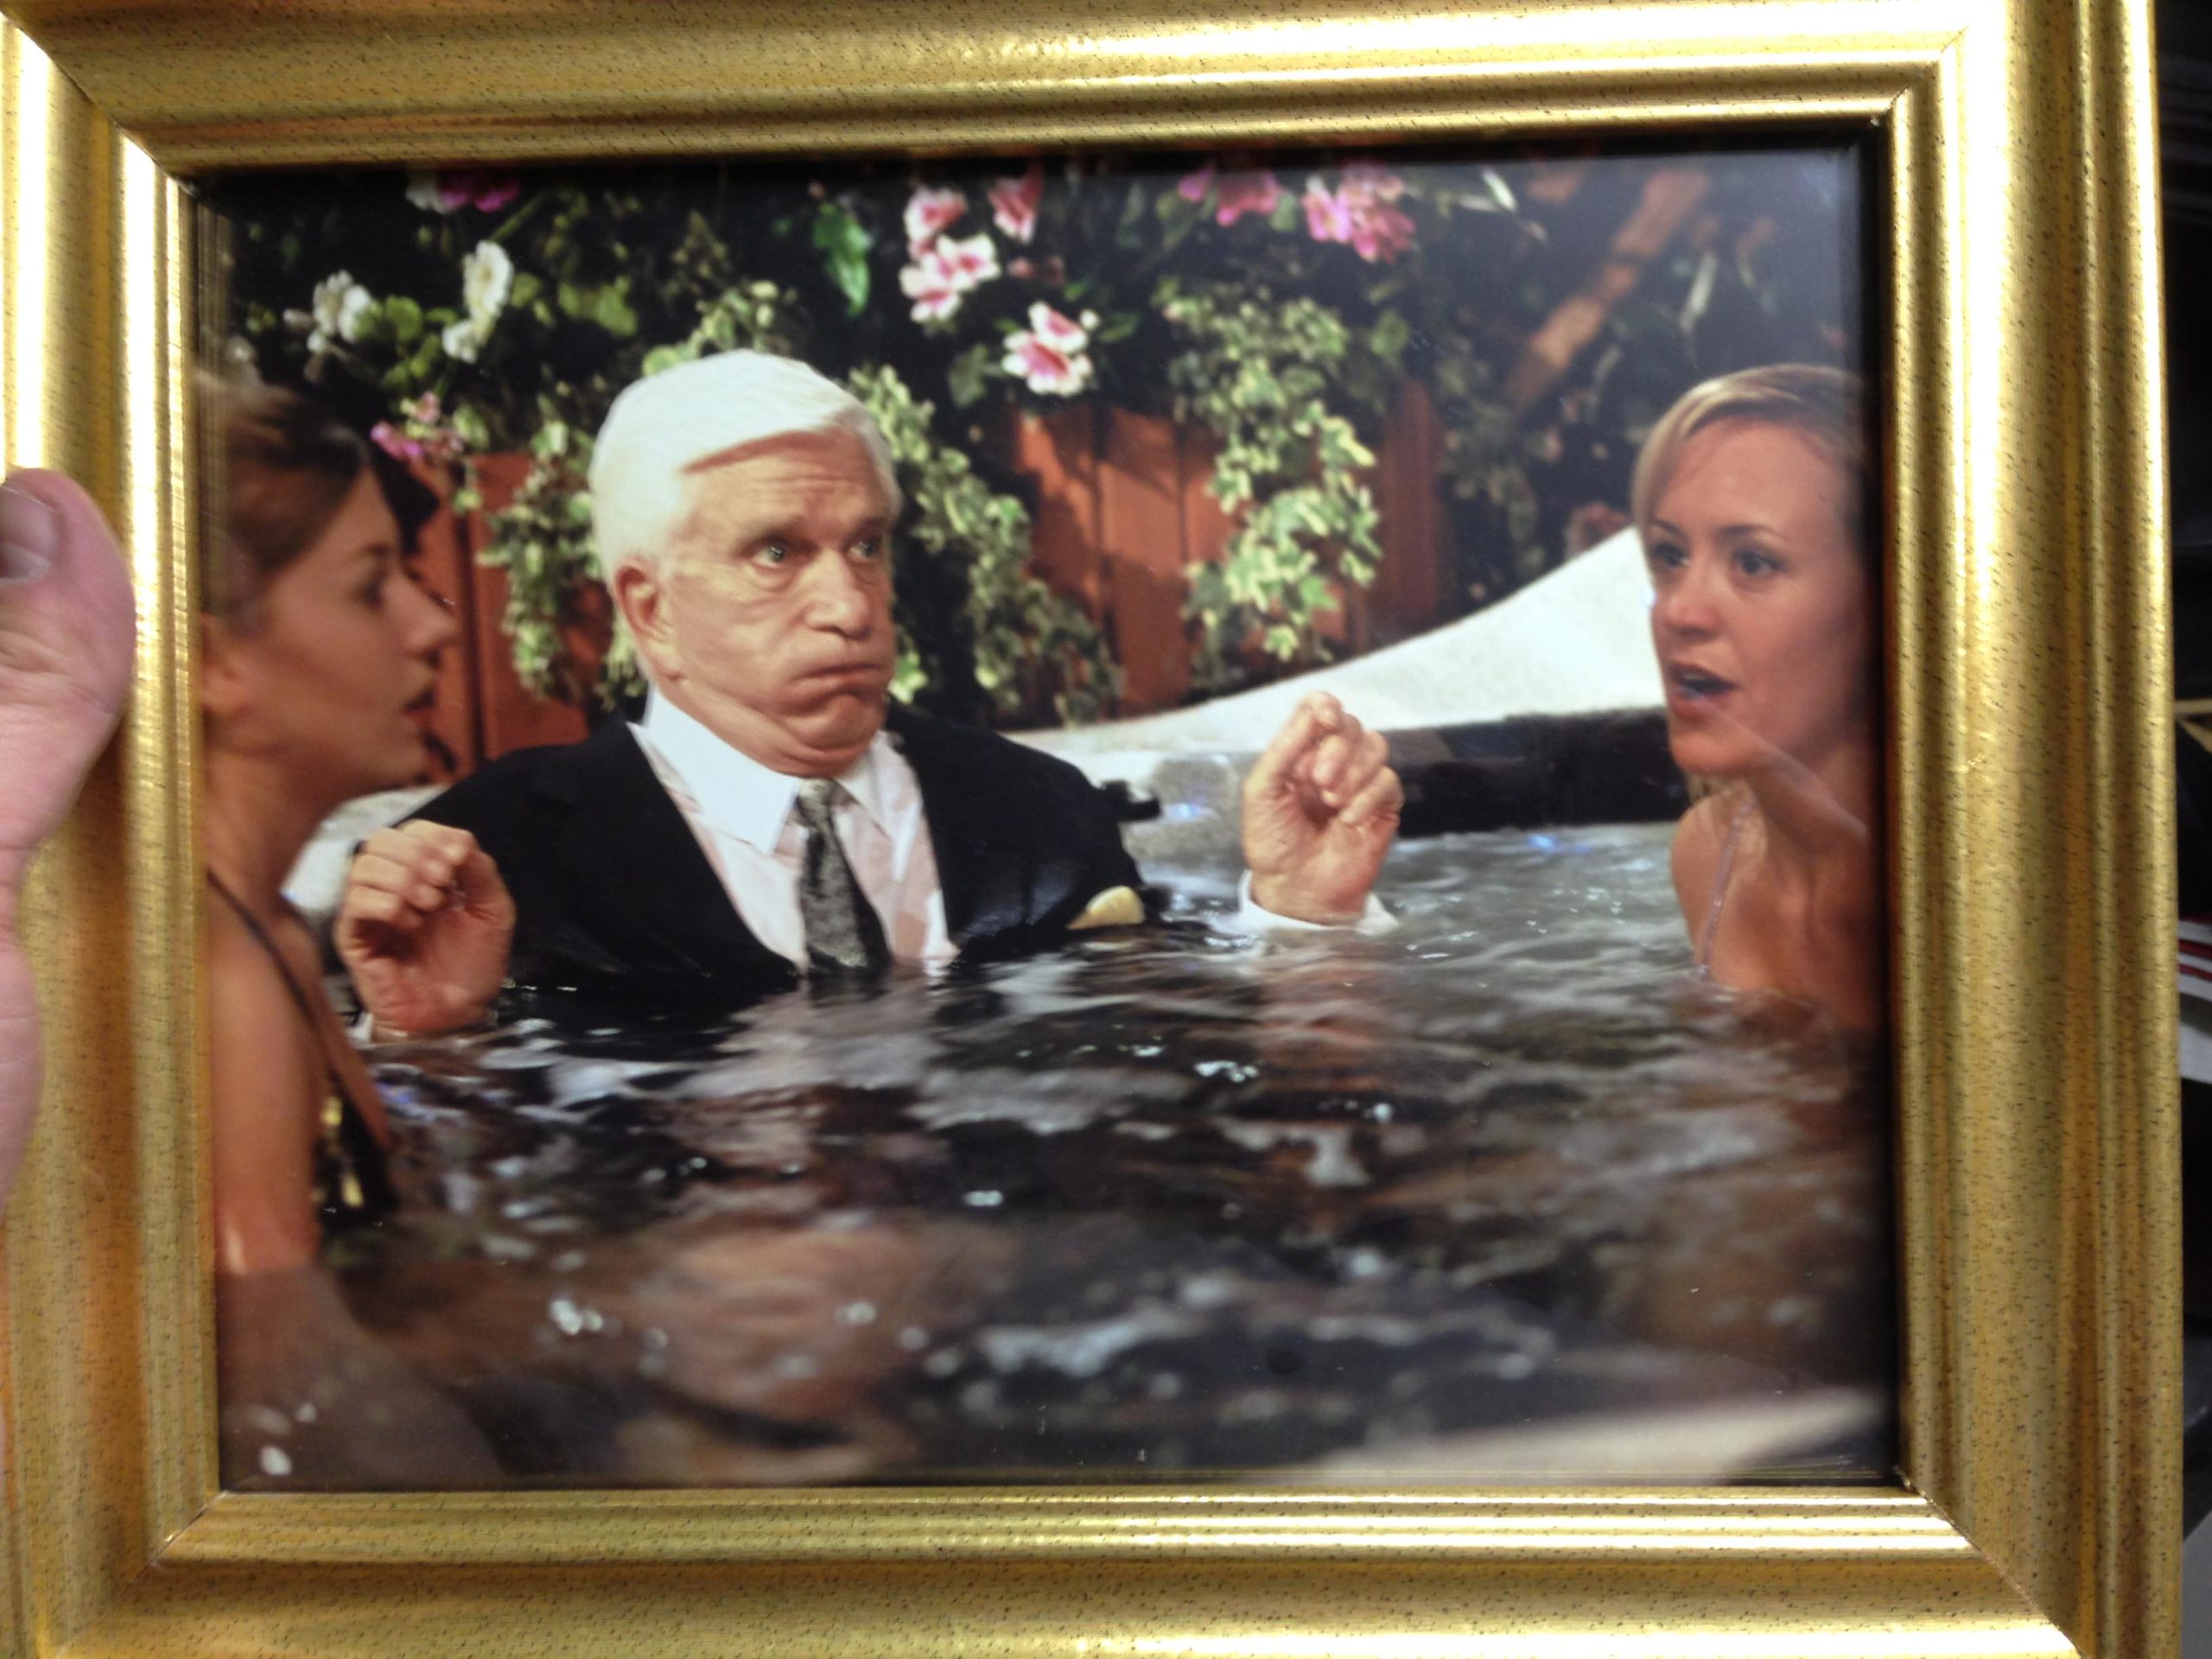 My+friend+works+for+a+hot+tub+company%2C+the+CEO+was+friends+with+Leslie+Nielsen